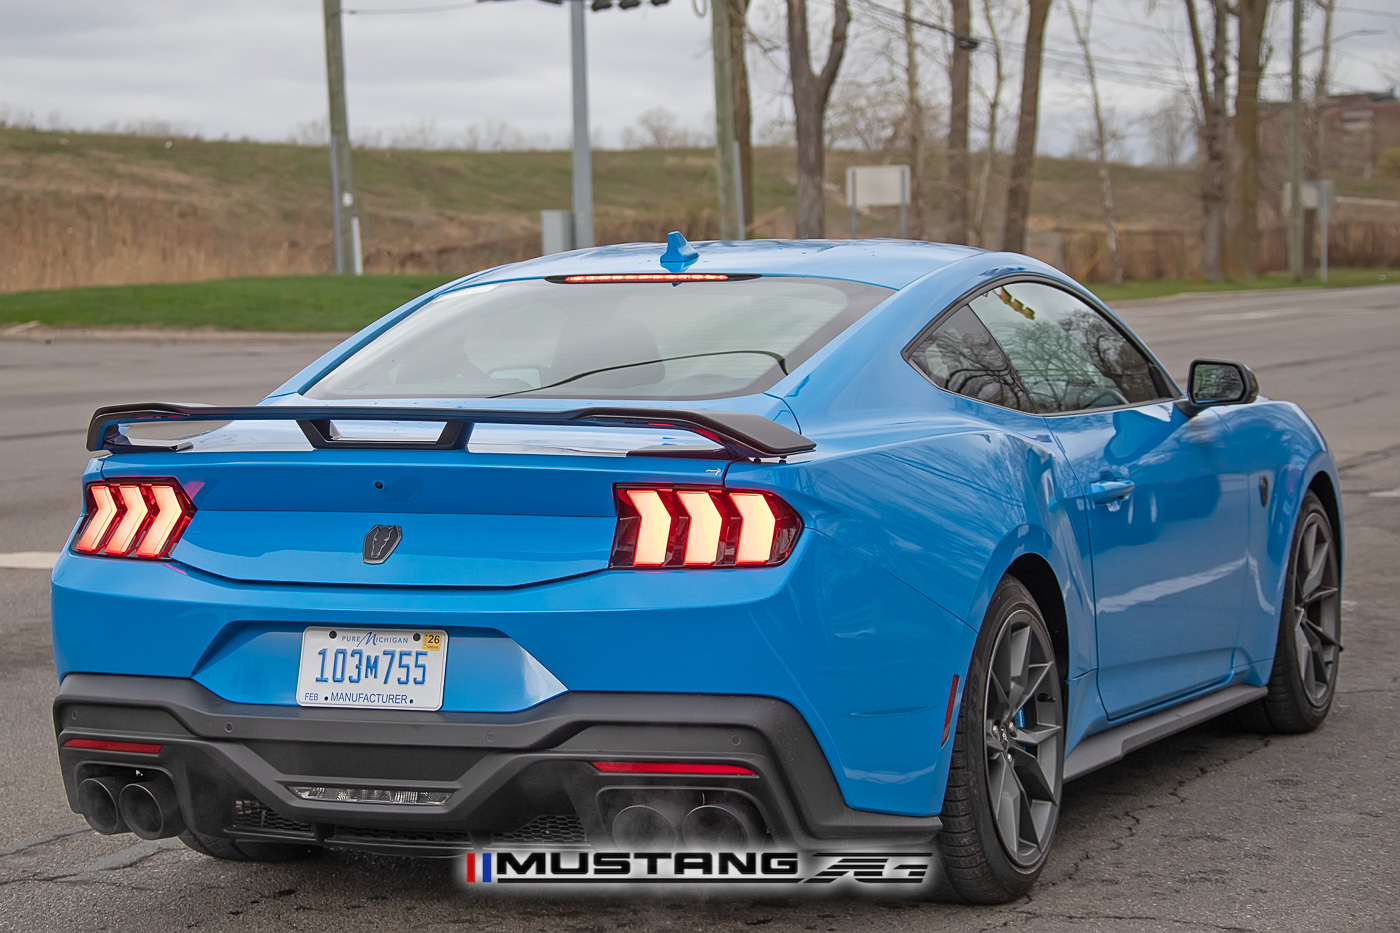 S650 Mustang Flat Rock plant down due to quality issues 2024-dark-horse-mustang-grabber-blue-spied-14-